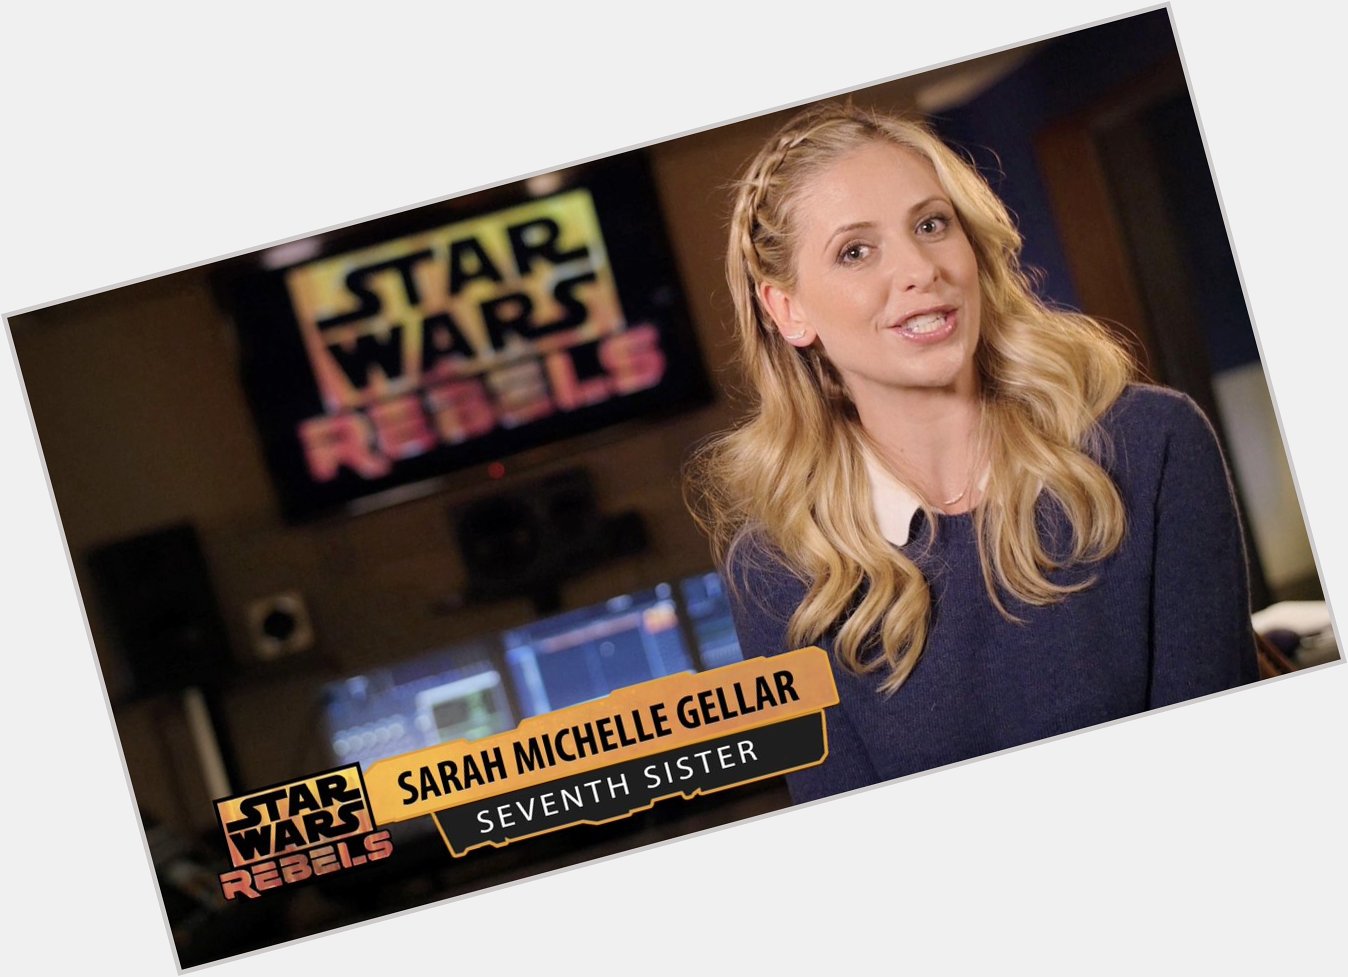 Happy Birthday to voice actress Sarah Michelle Gellar, who played Seventh Sister in 